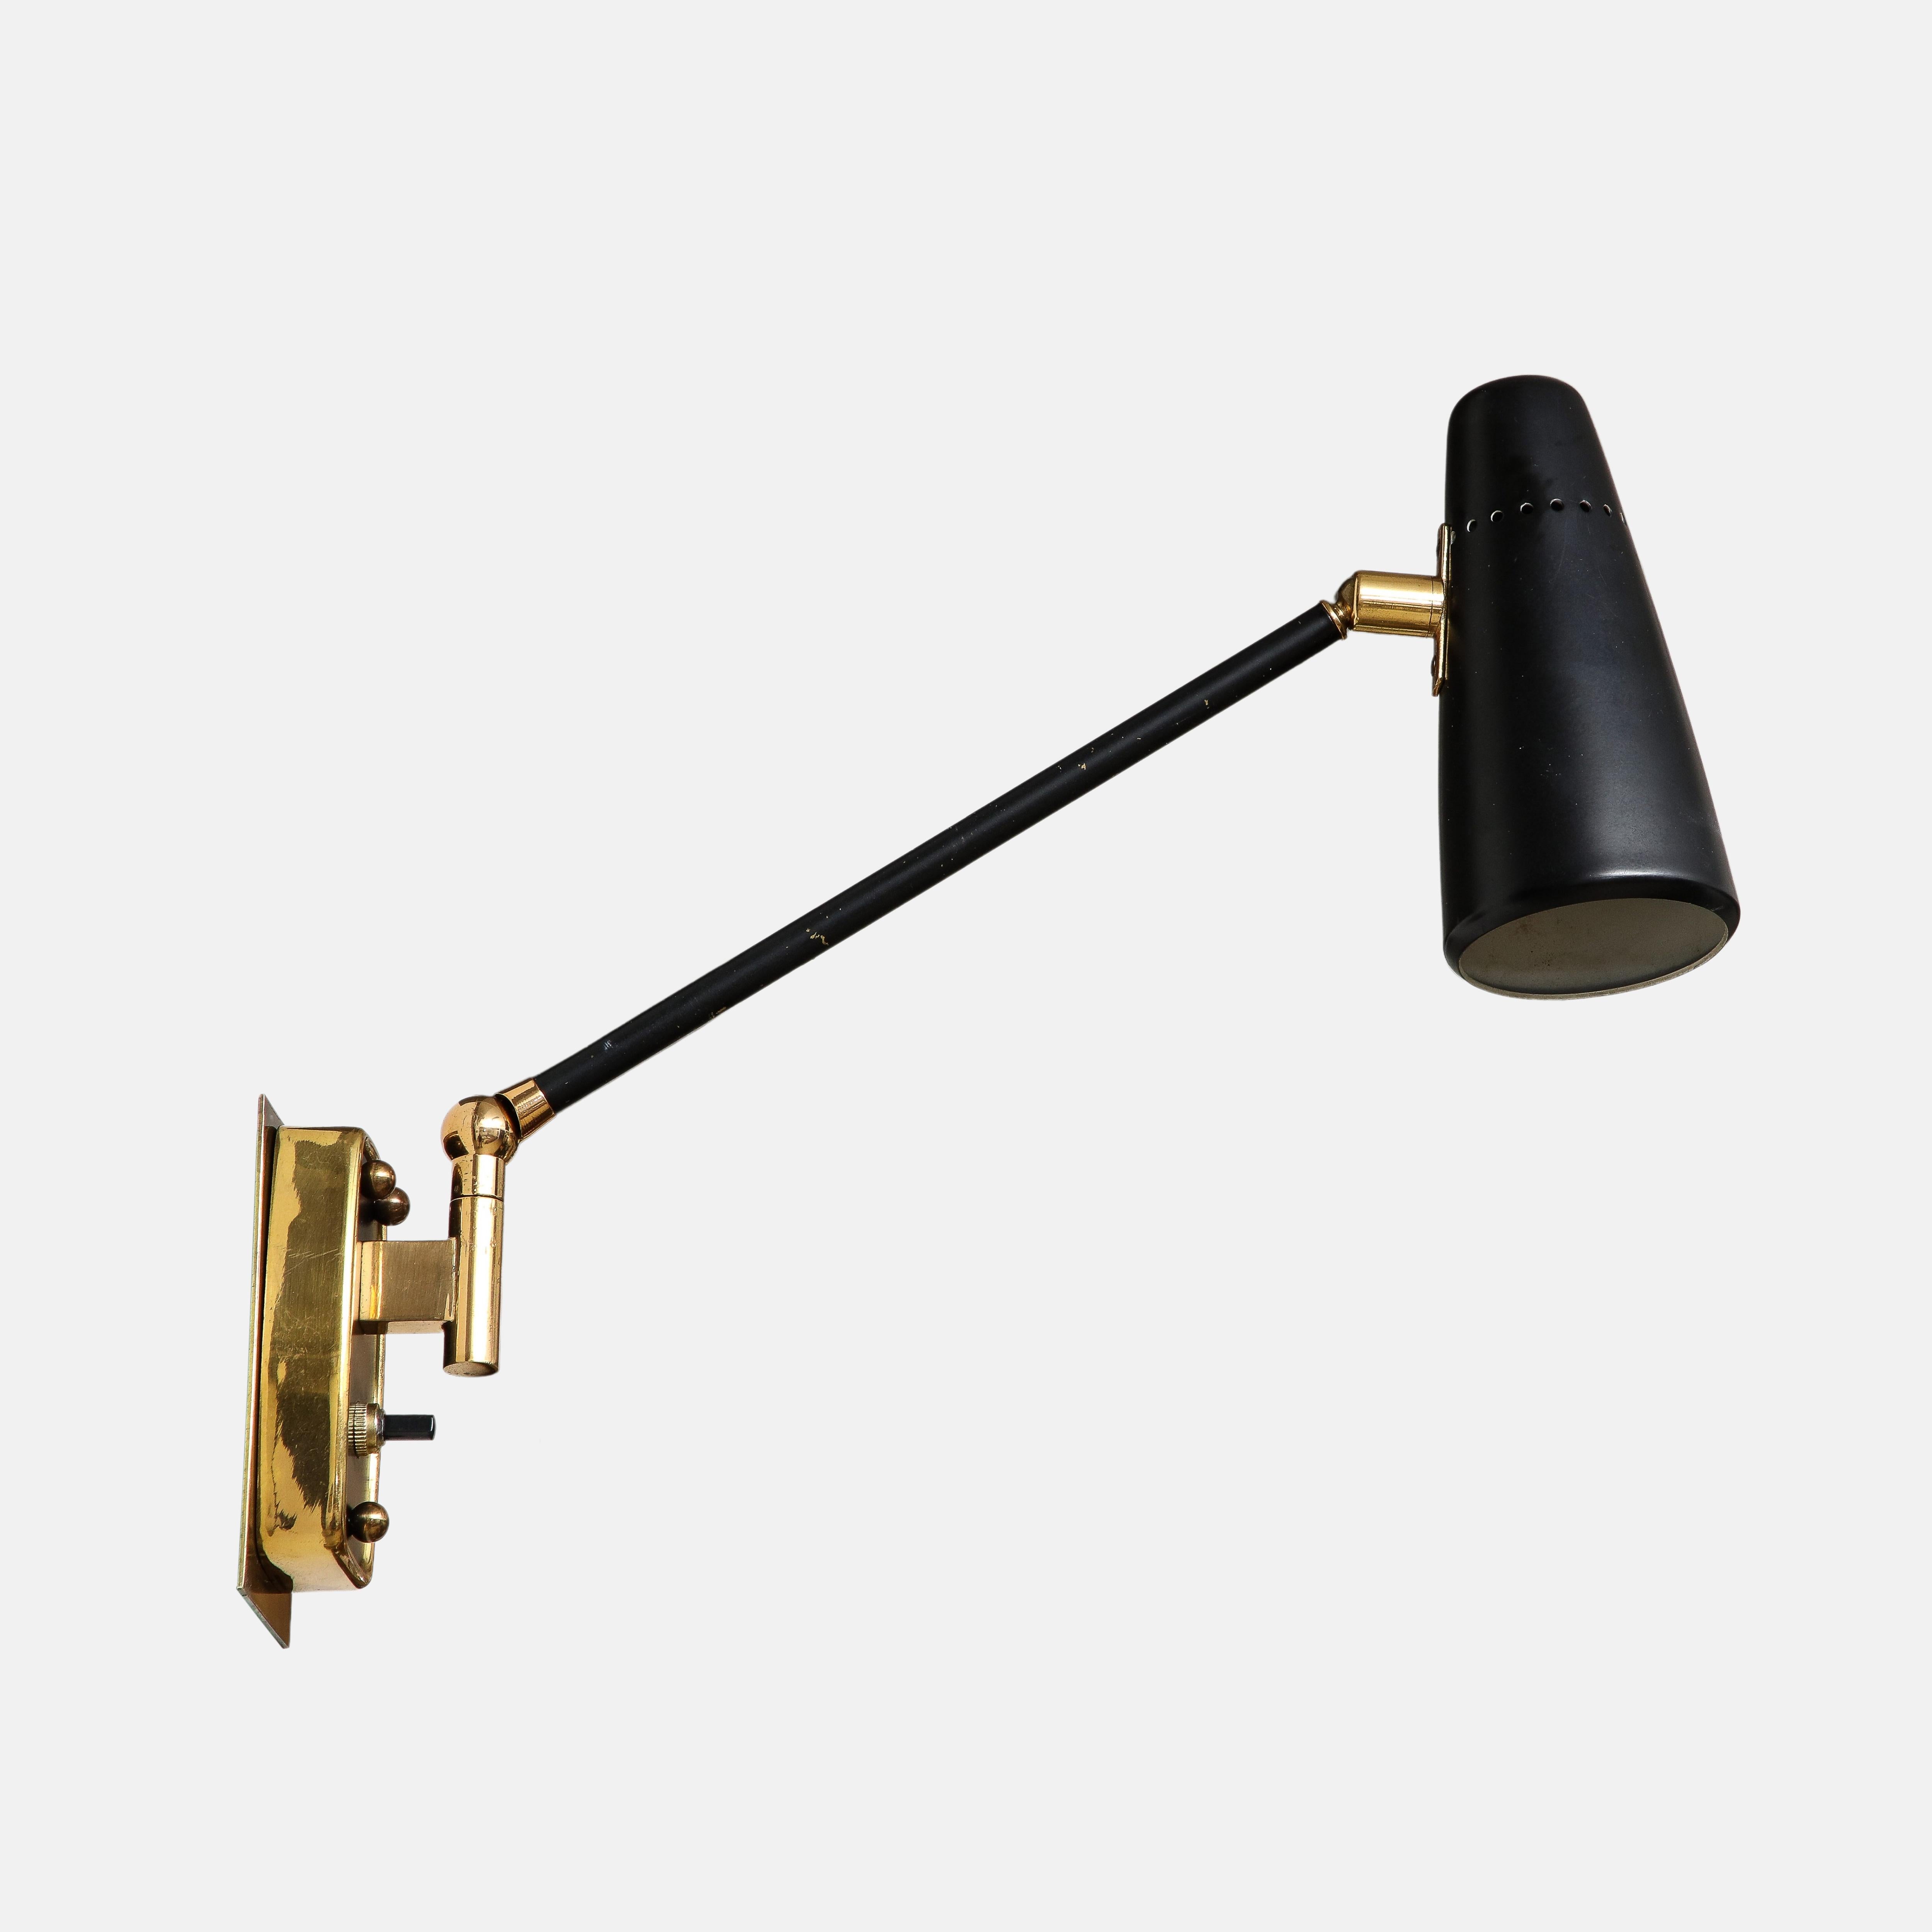 Stilnovo rare pair of articulating sconces, wall lights, or reading wall lights with pivoting black enameled perforated metal shades on brass arms. The metal shades and arms or stems pivot from ball joints and are attached to the original backplates